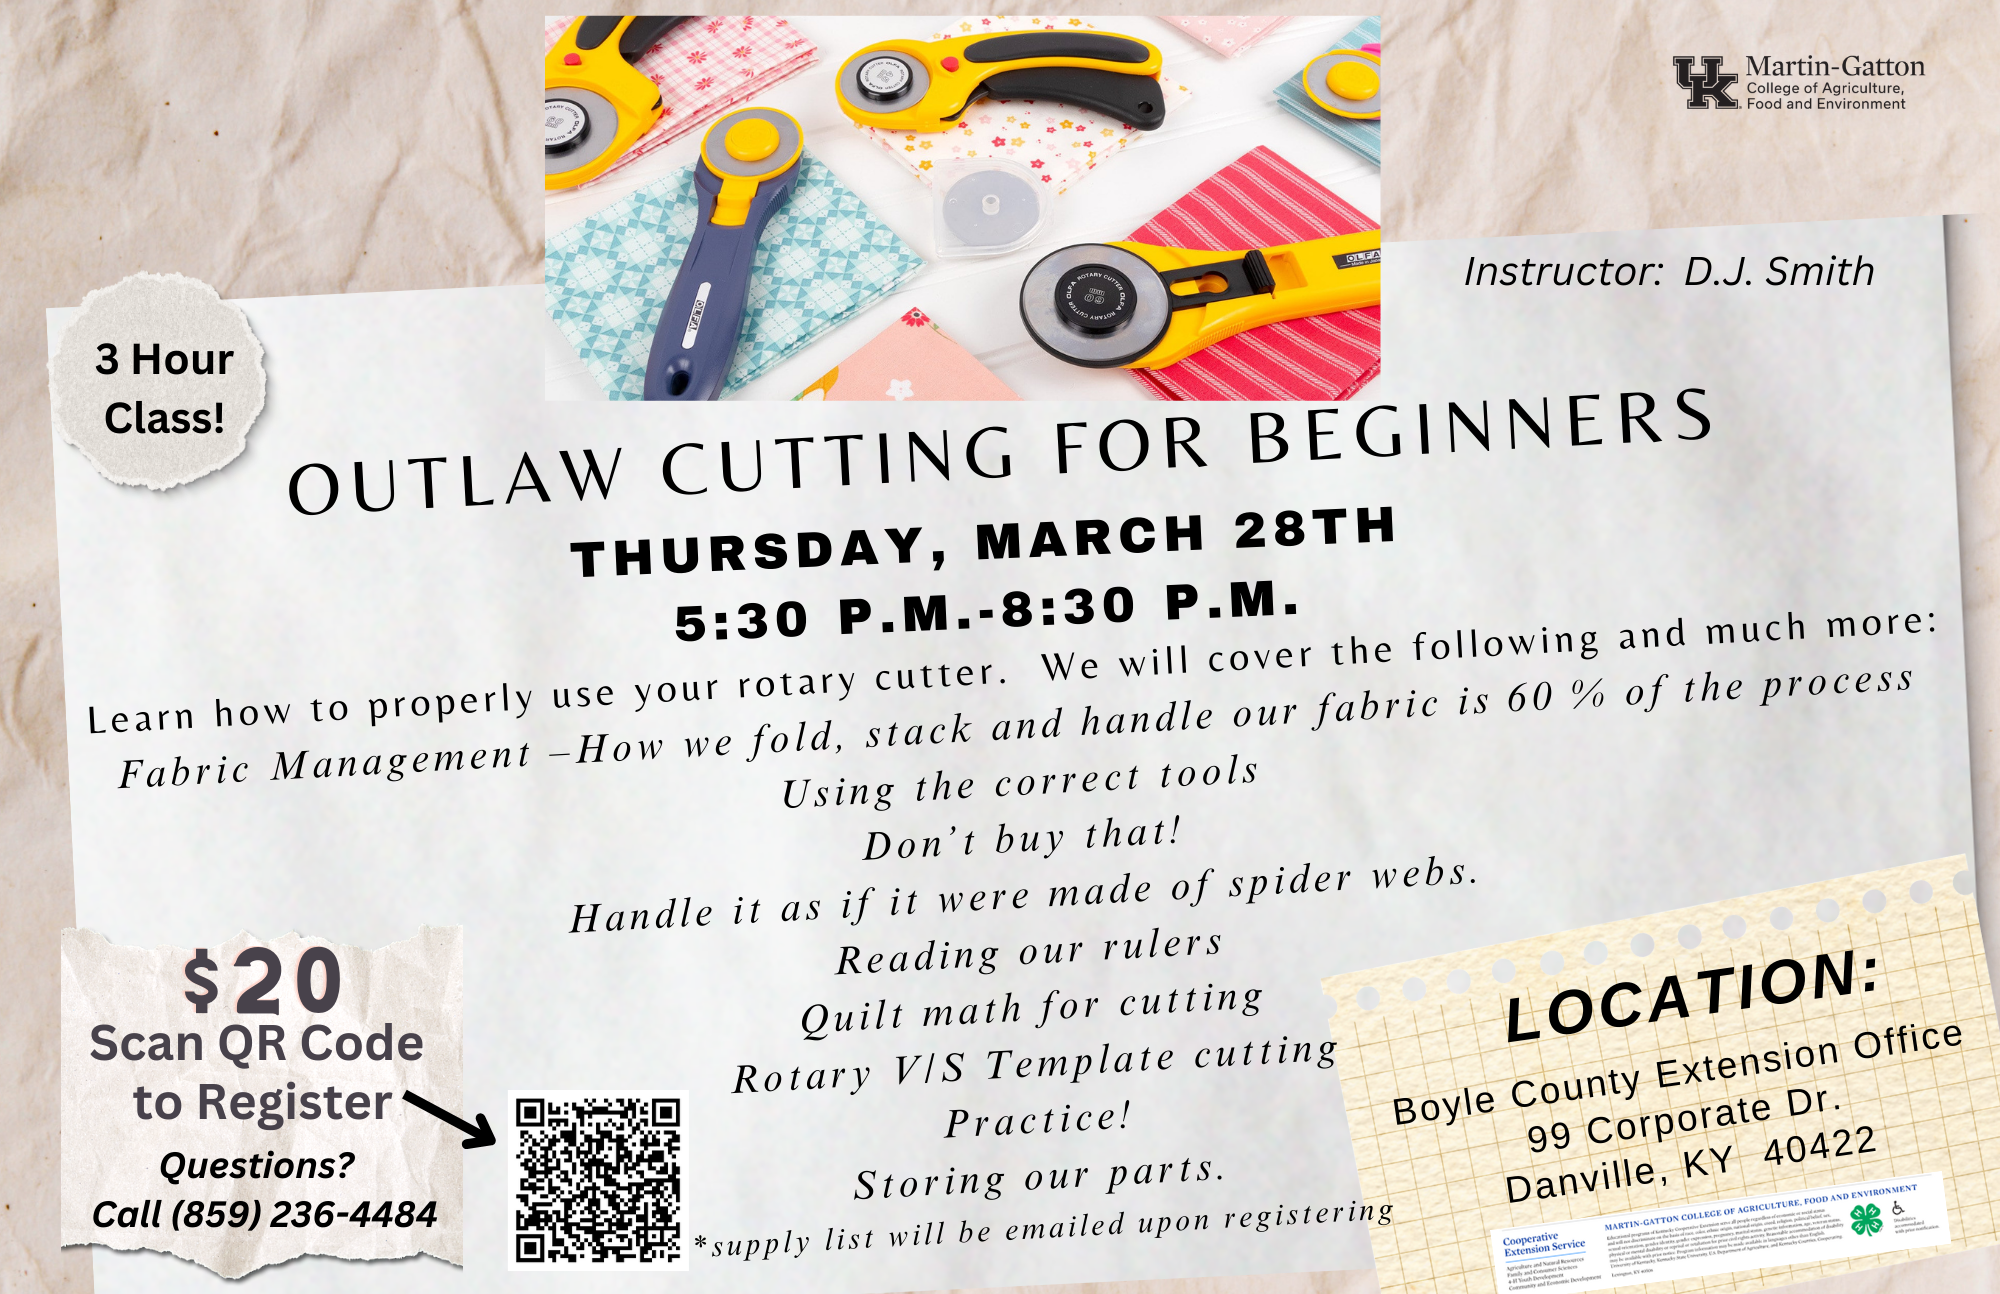 Outlaw Cutting for Beginners